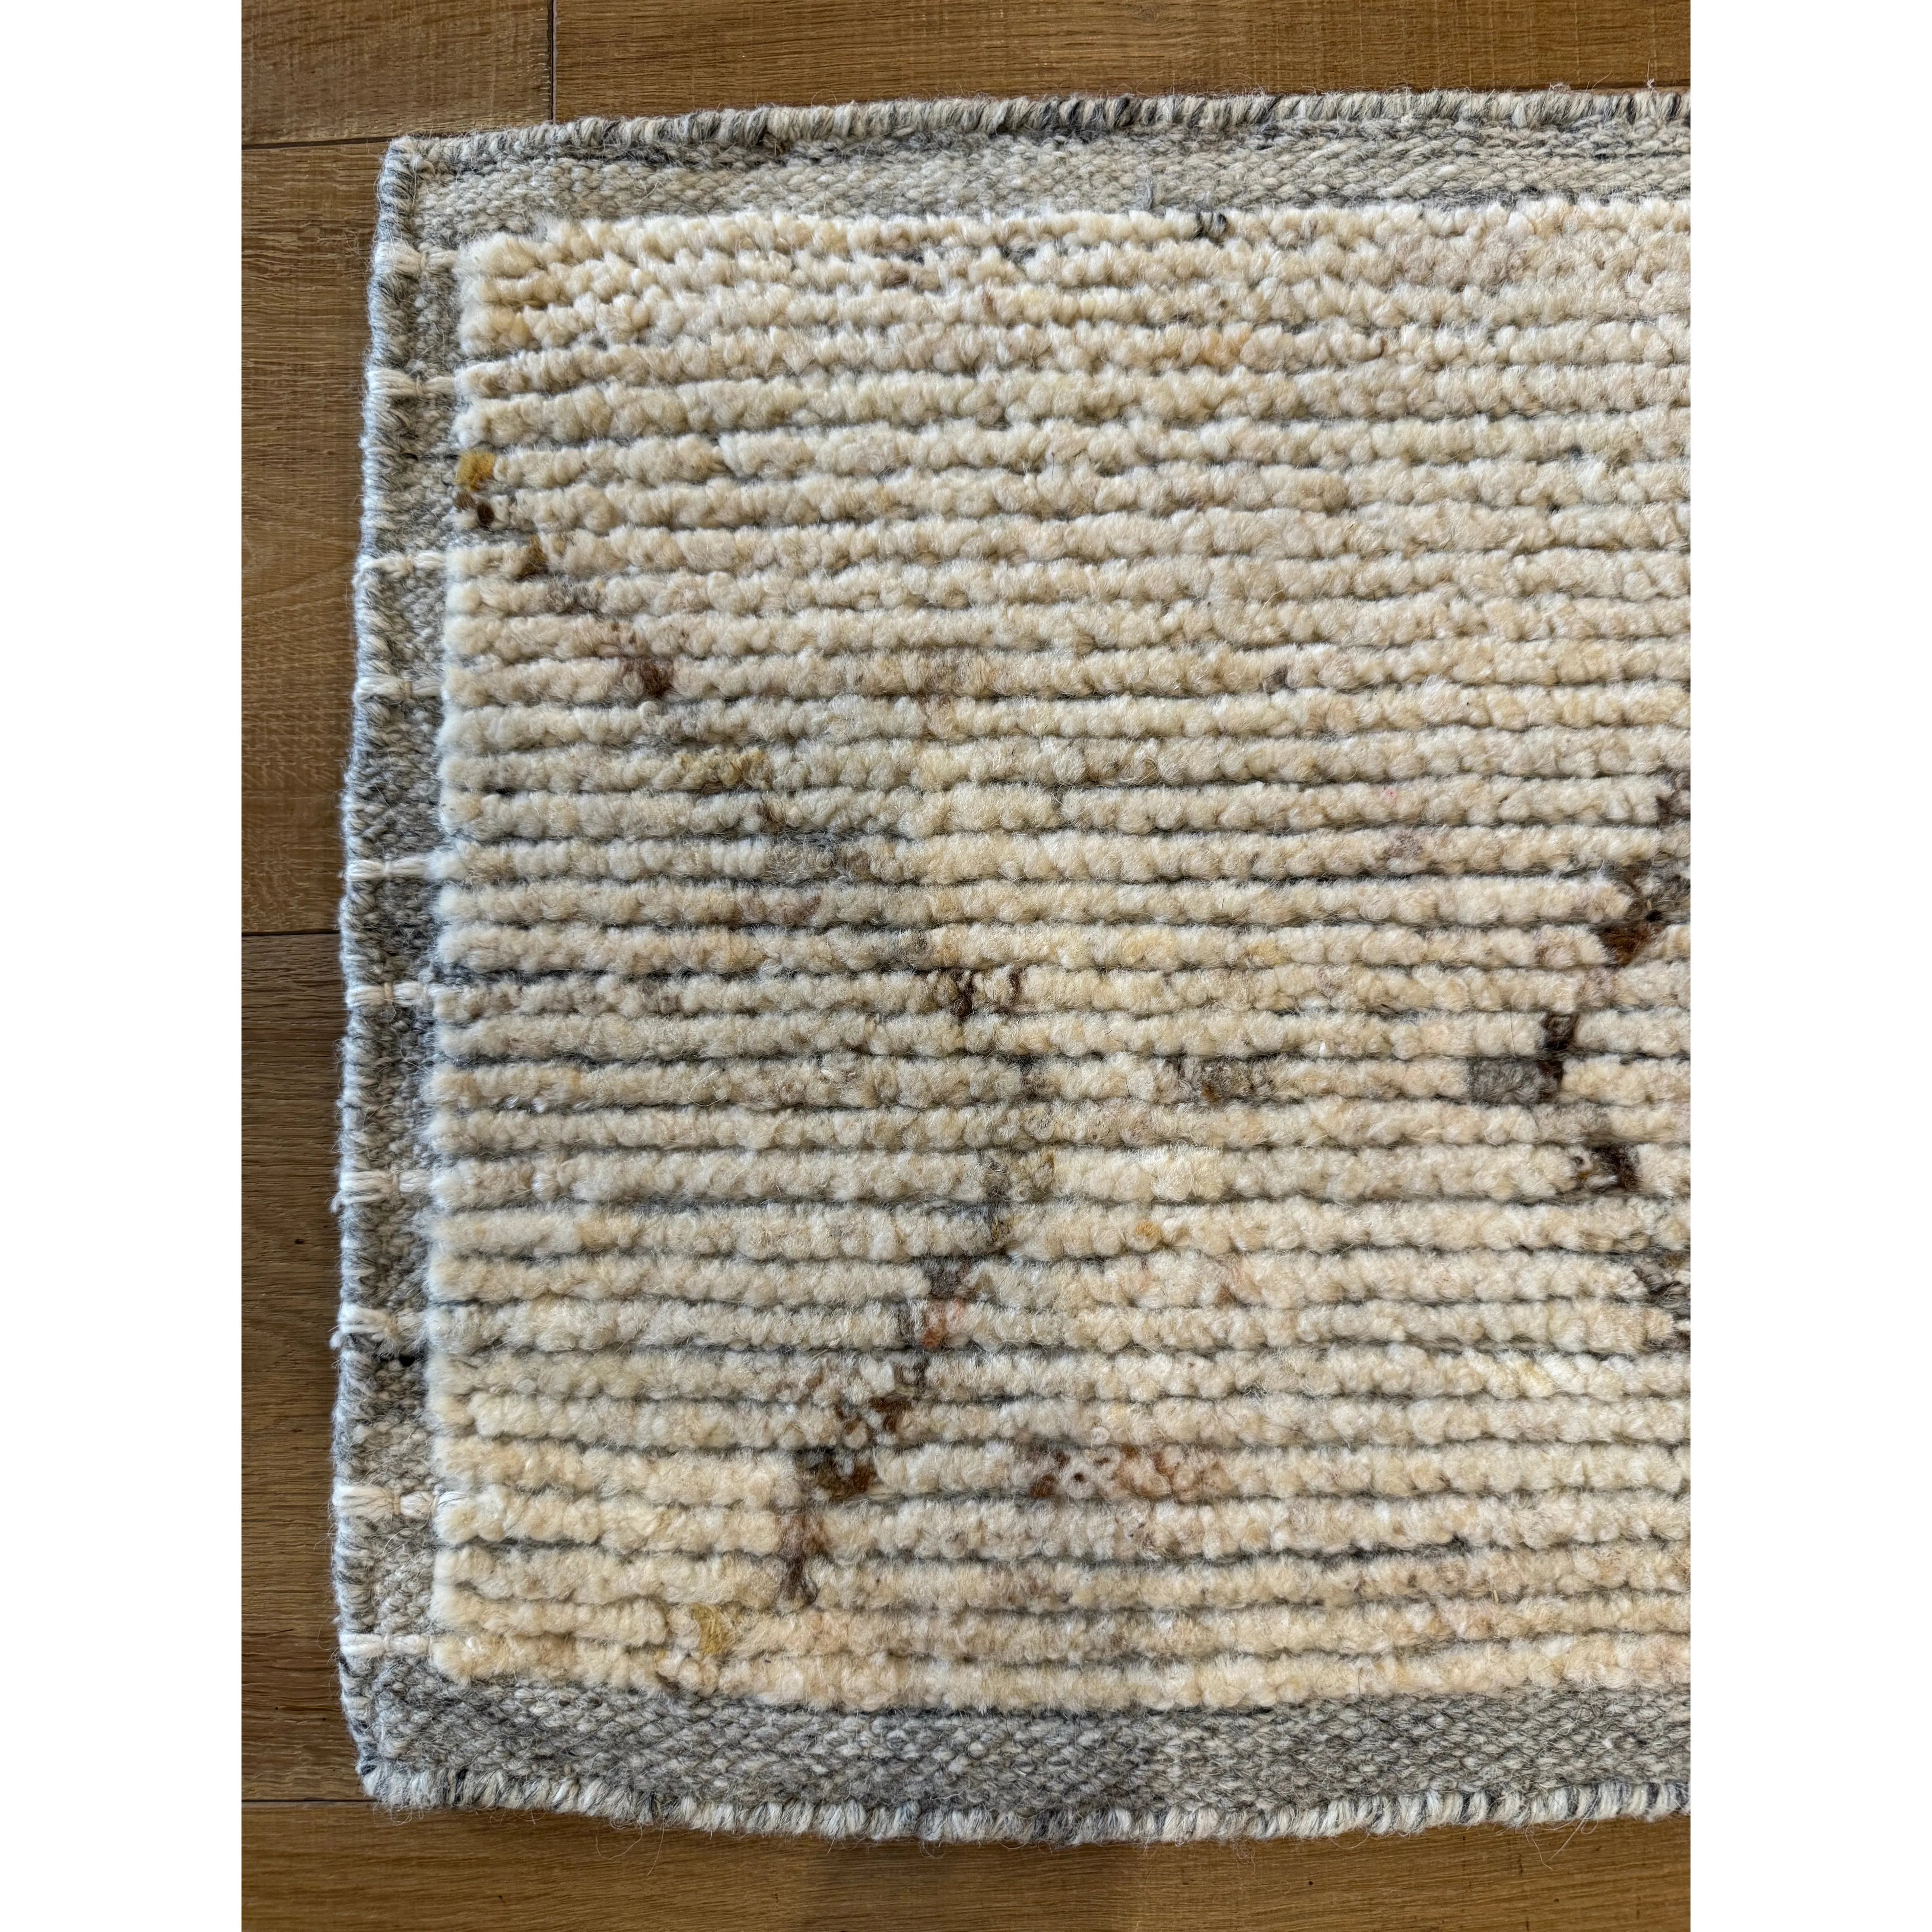 Subtle linear textures and natural colorways define the irresistible quality of the Seora collection. The Tepal area rug features a distressed trellis motif for an intriguing dose of modern appeal. The textural, wool pile contains no dye, reflecting the natural colors of the sheep, for a rich and grounding palette of cream, brown, gray, and flecks of black. Amethyst Home provides interior design, new construction, custom furniture, and area rugs in the Kansas City metro area.